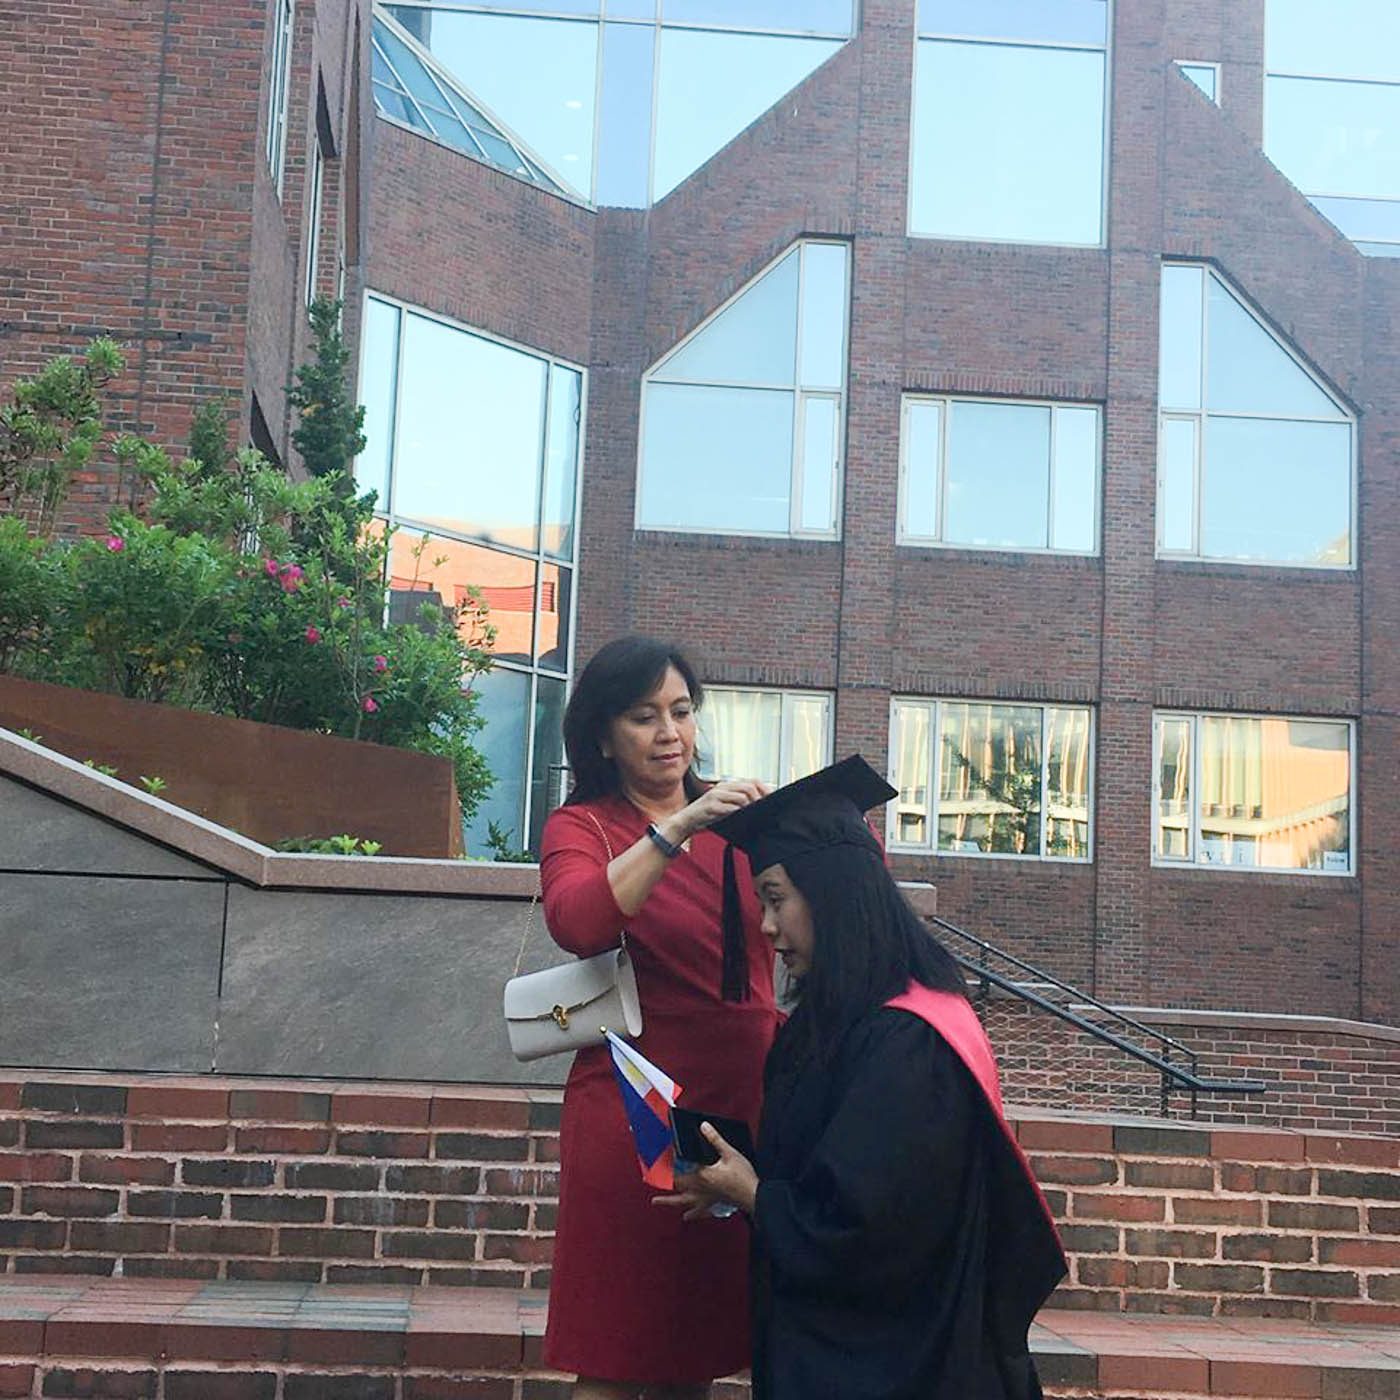 ALL SET. Vice President Leni Robredo fixes the graduation cap of her daughter Aika as they prepare to attend the 367th commencement of Harvard University on May 24, 2018. Photo by Rappler 